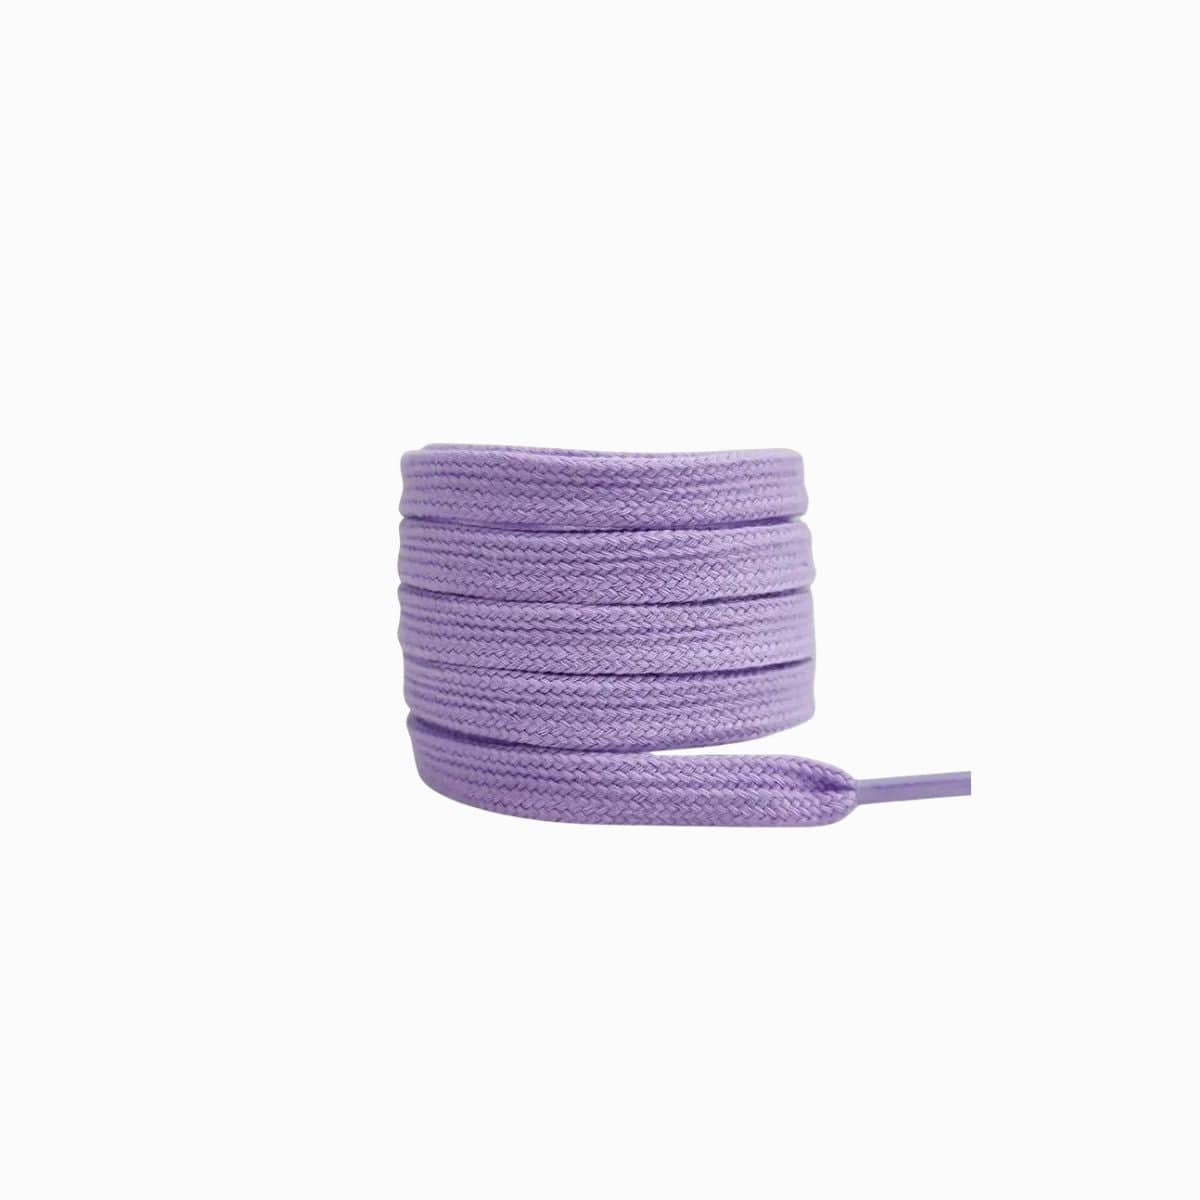 Light Purple Replacement Adidas Shoe Laces for Adidas Samba OG Sneakers by Kicks Shoelaces